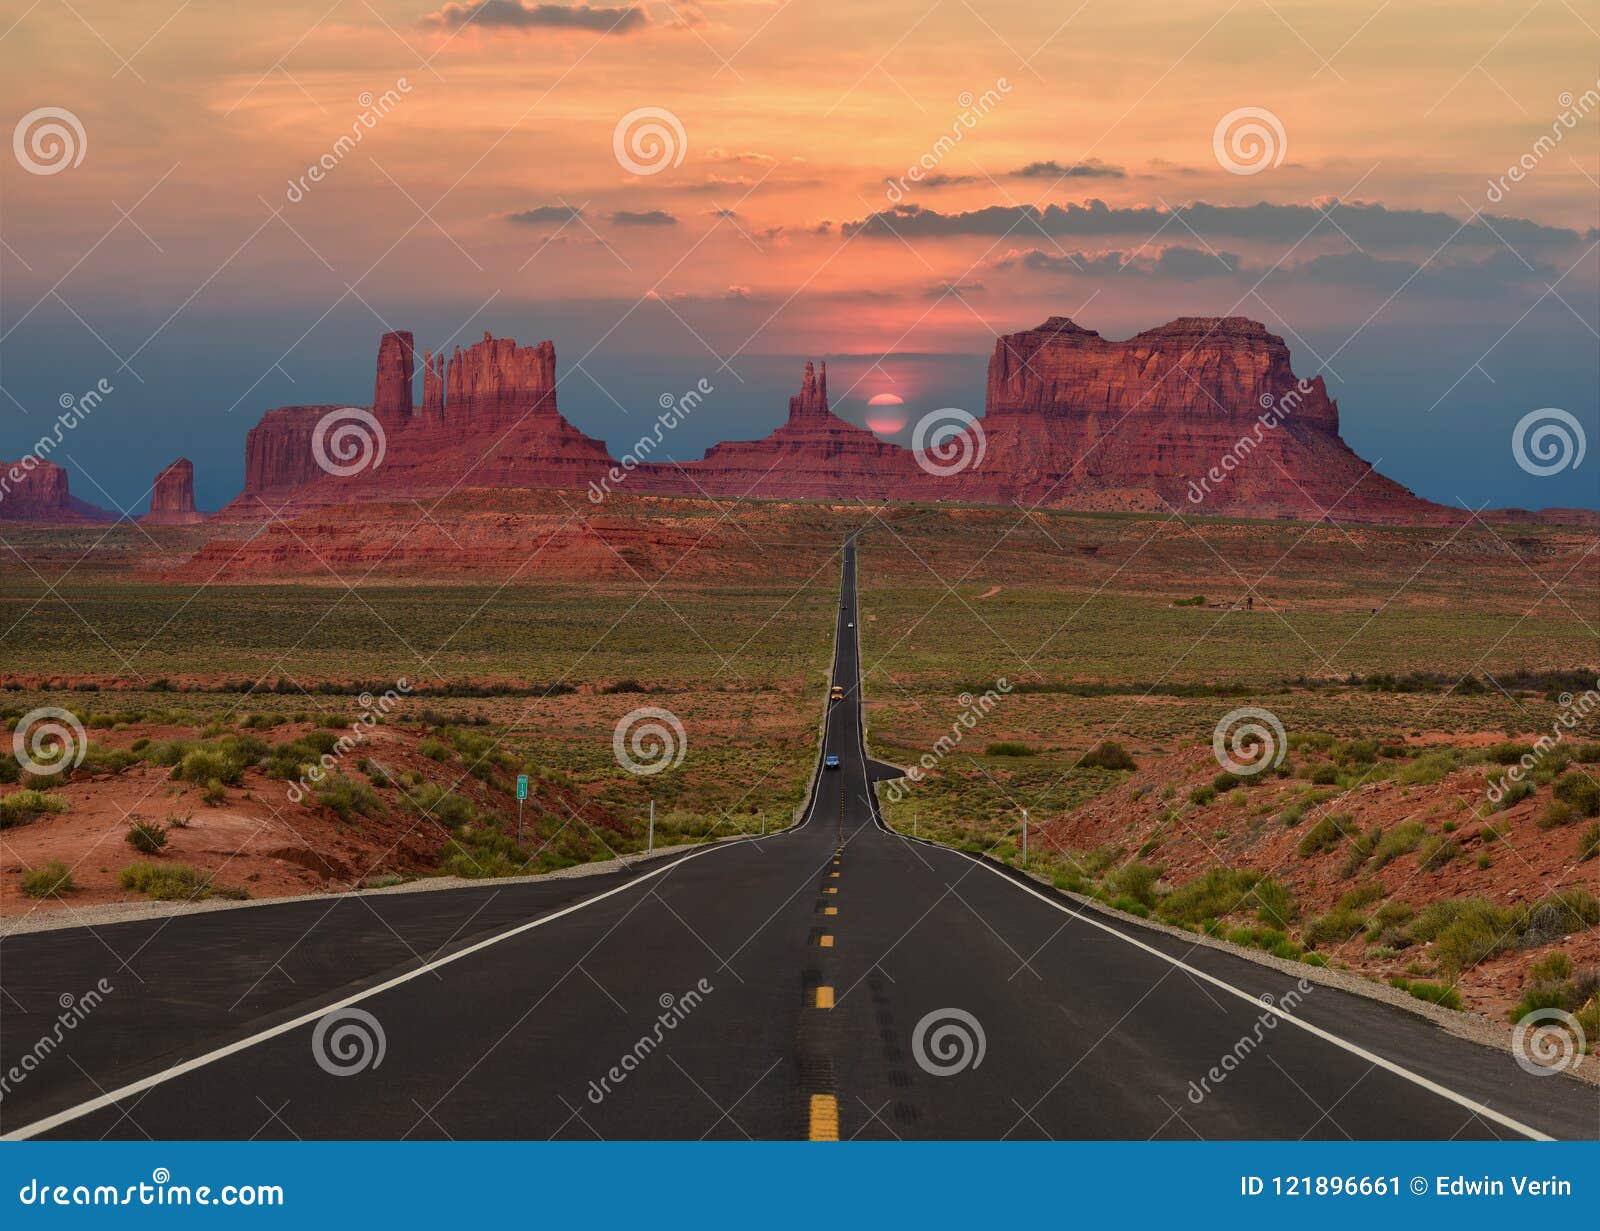 scenic highway in monument valley tribal park in arizona-utah border, u.s.a. at sunset.